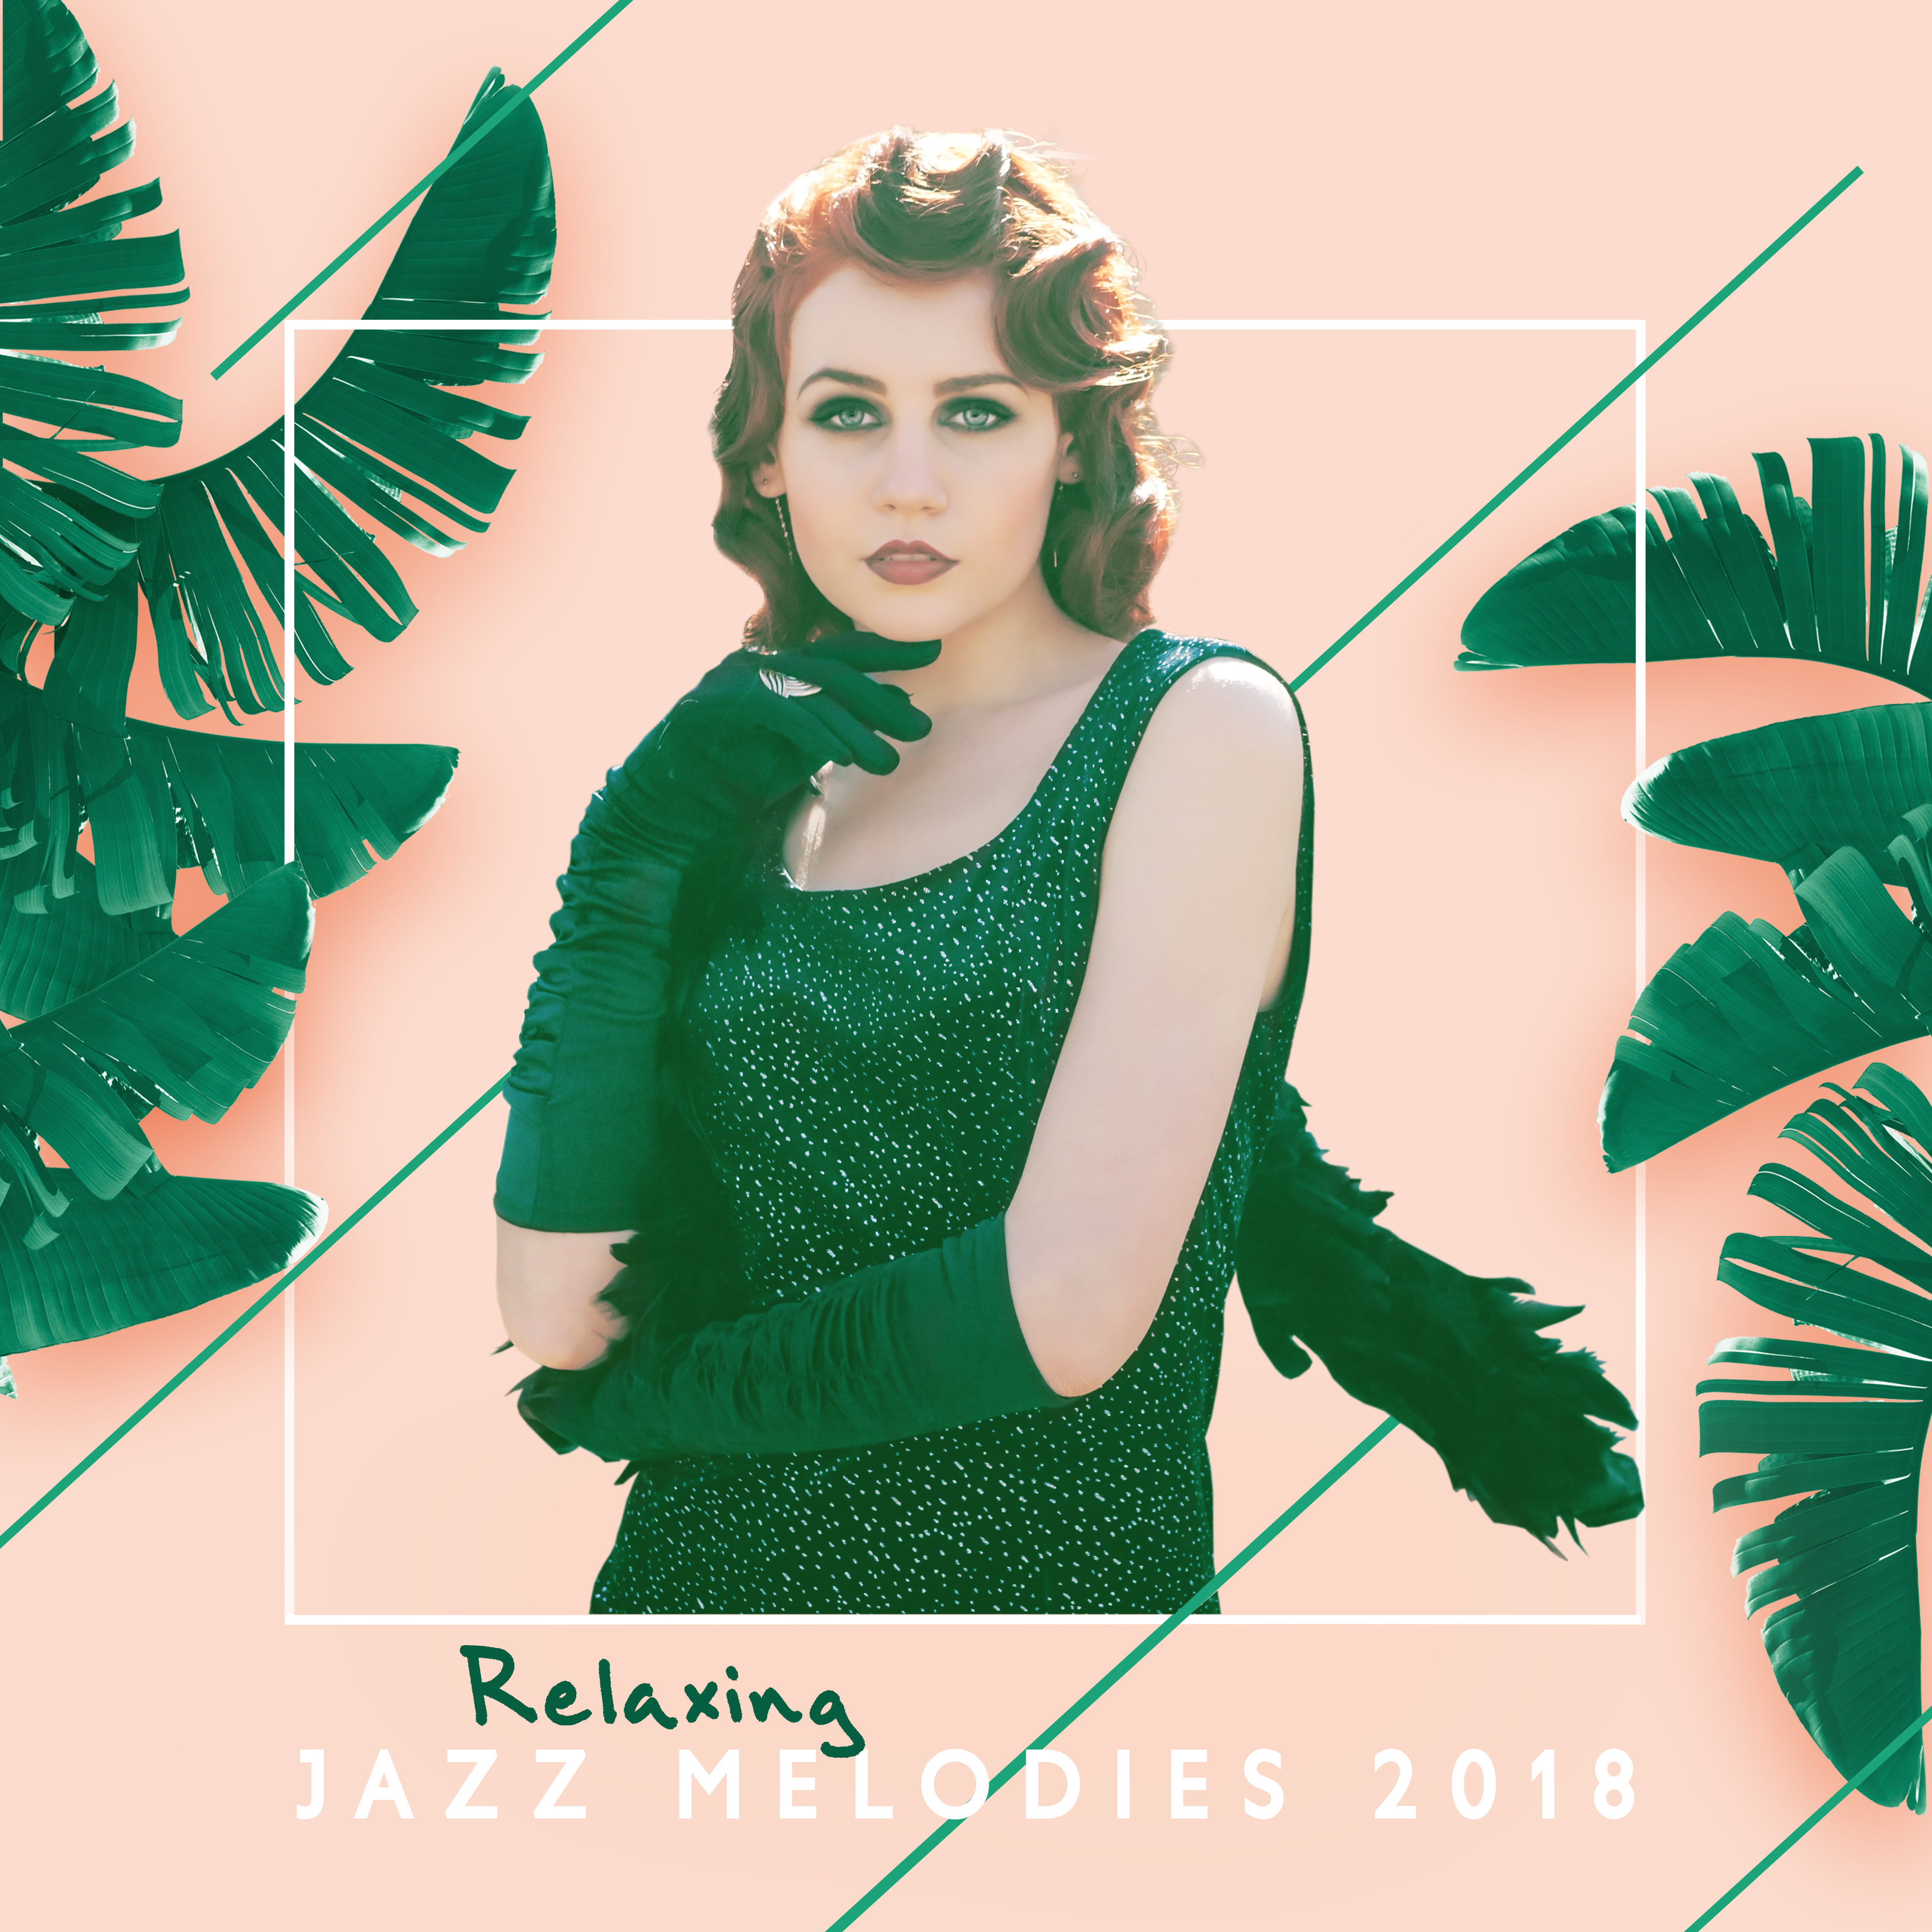 Relaxing Jazz Melodies 2018